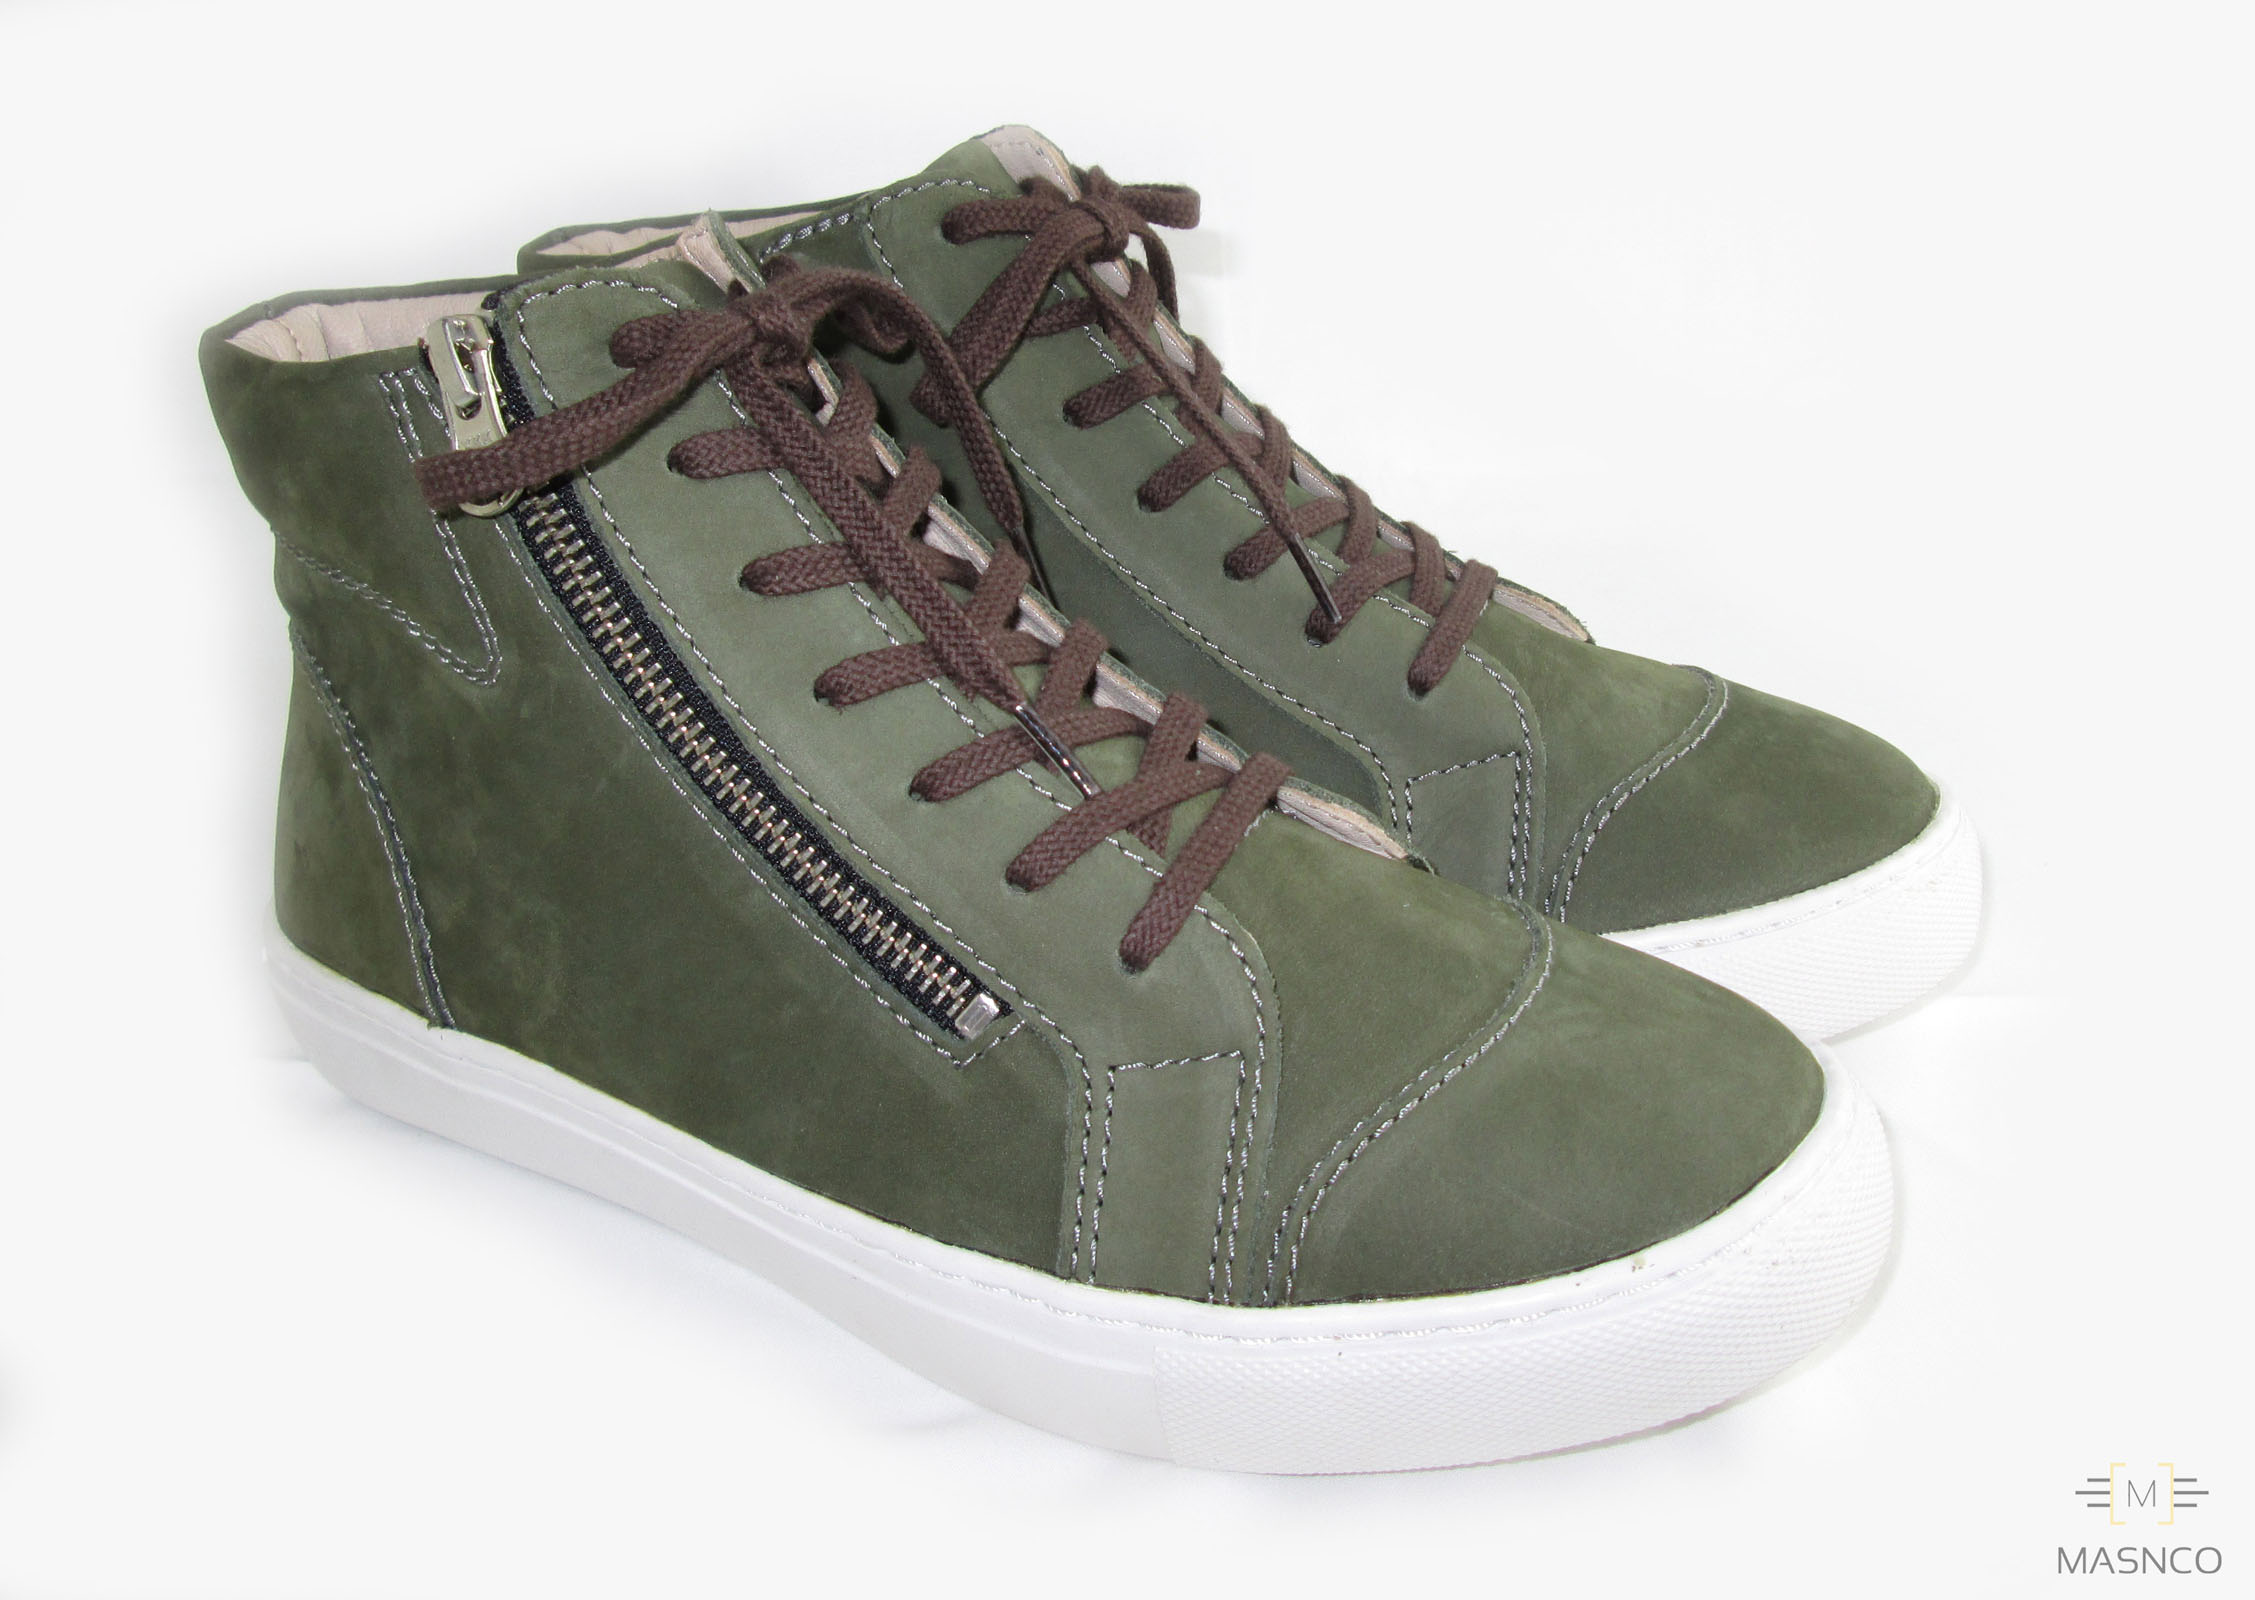 Exotic Sneakers for Women’s (Green)